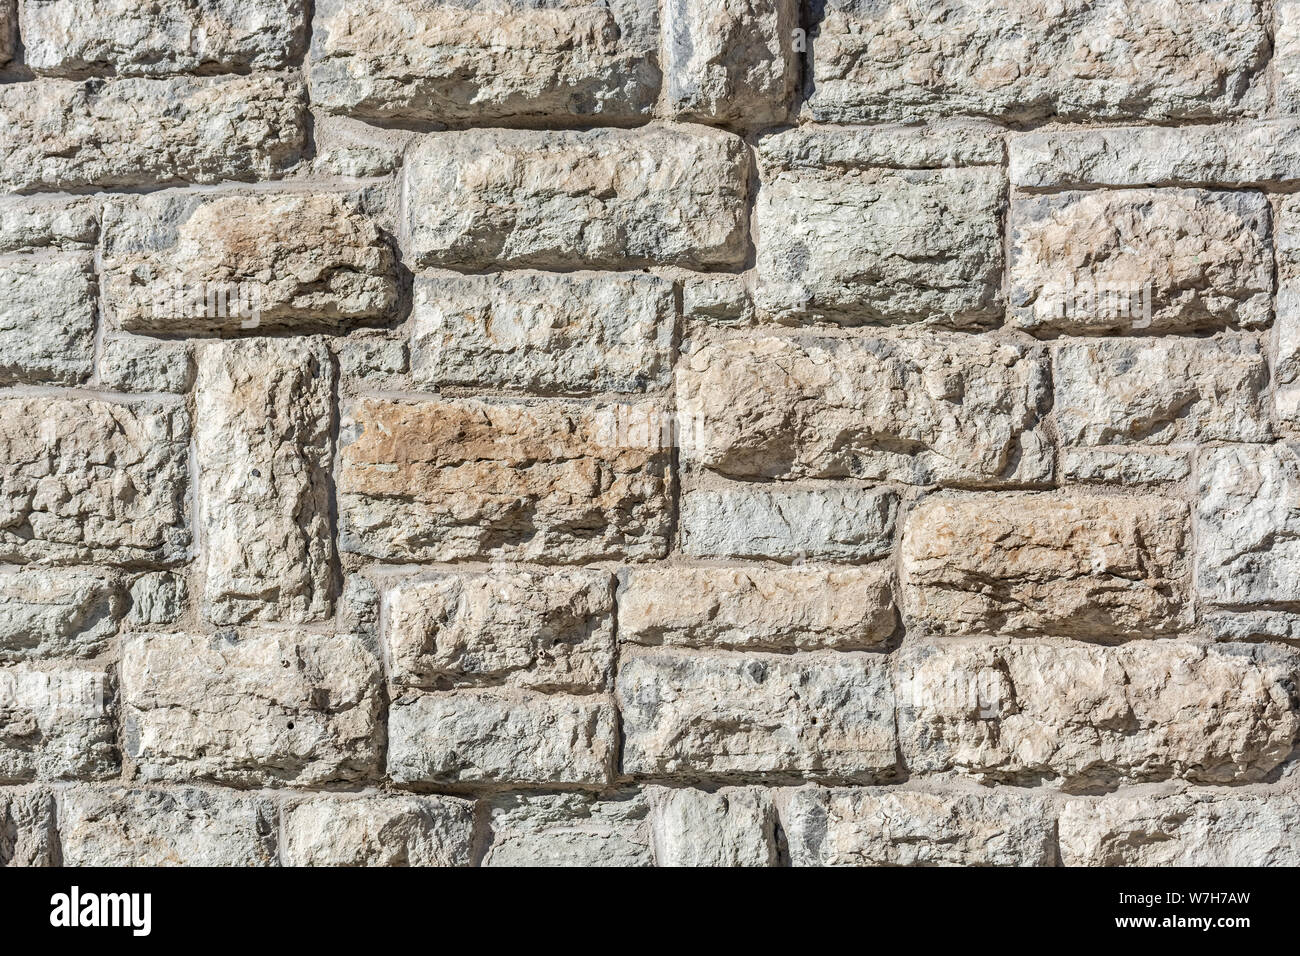 Dark fragment of an old limestone stone block wall for use as an abstract background and texture. Stock Photo